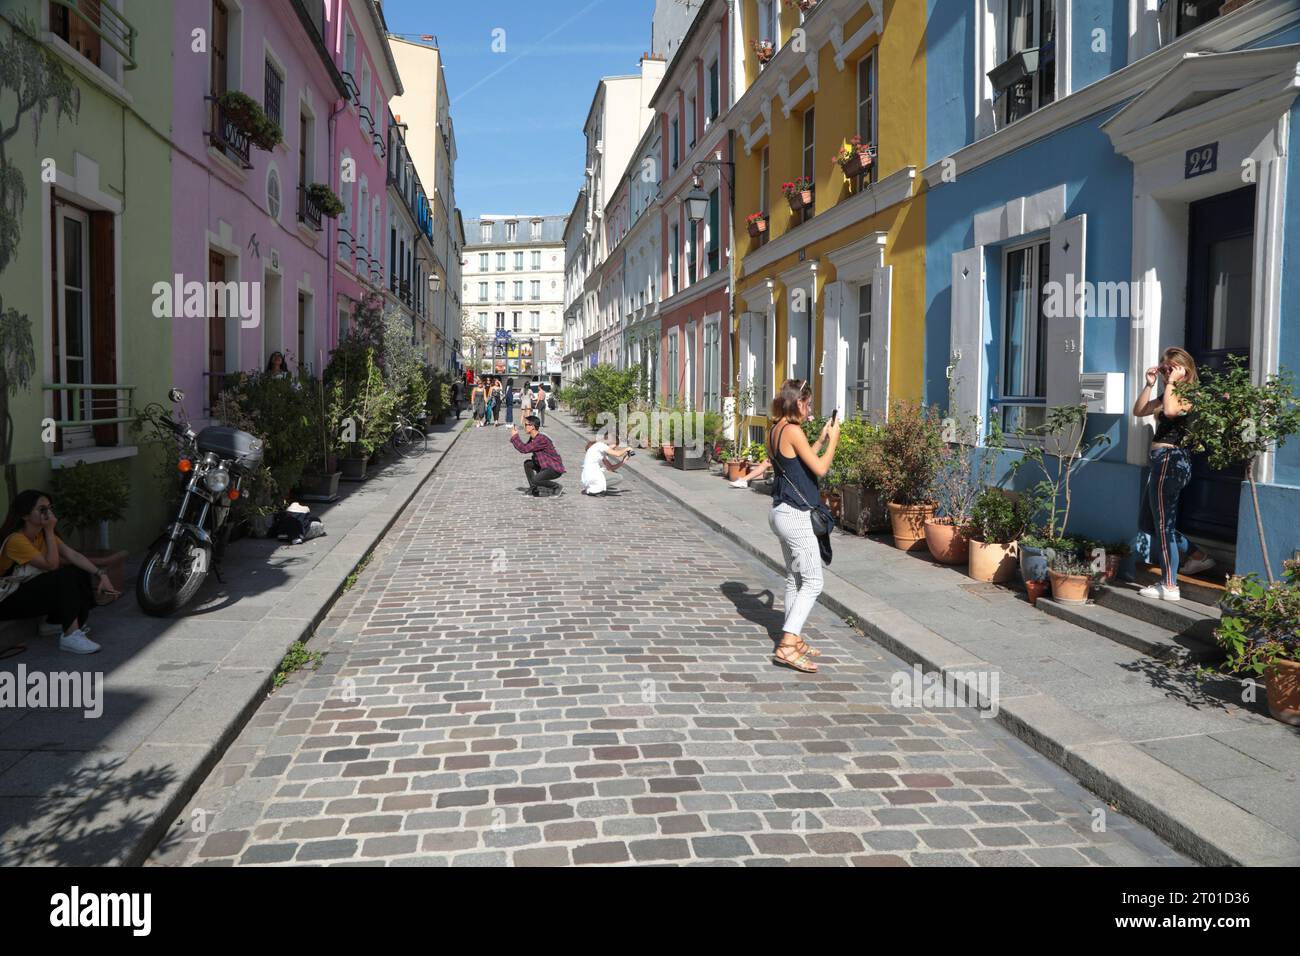 RUE CREMIEUX , A SOCIAL MEDIA OBSESSION IN PARIS Stock Photo